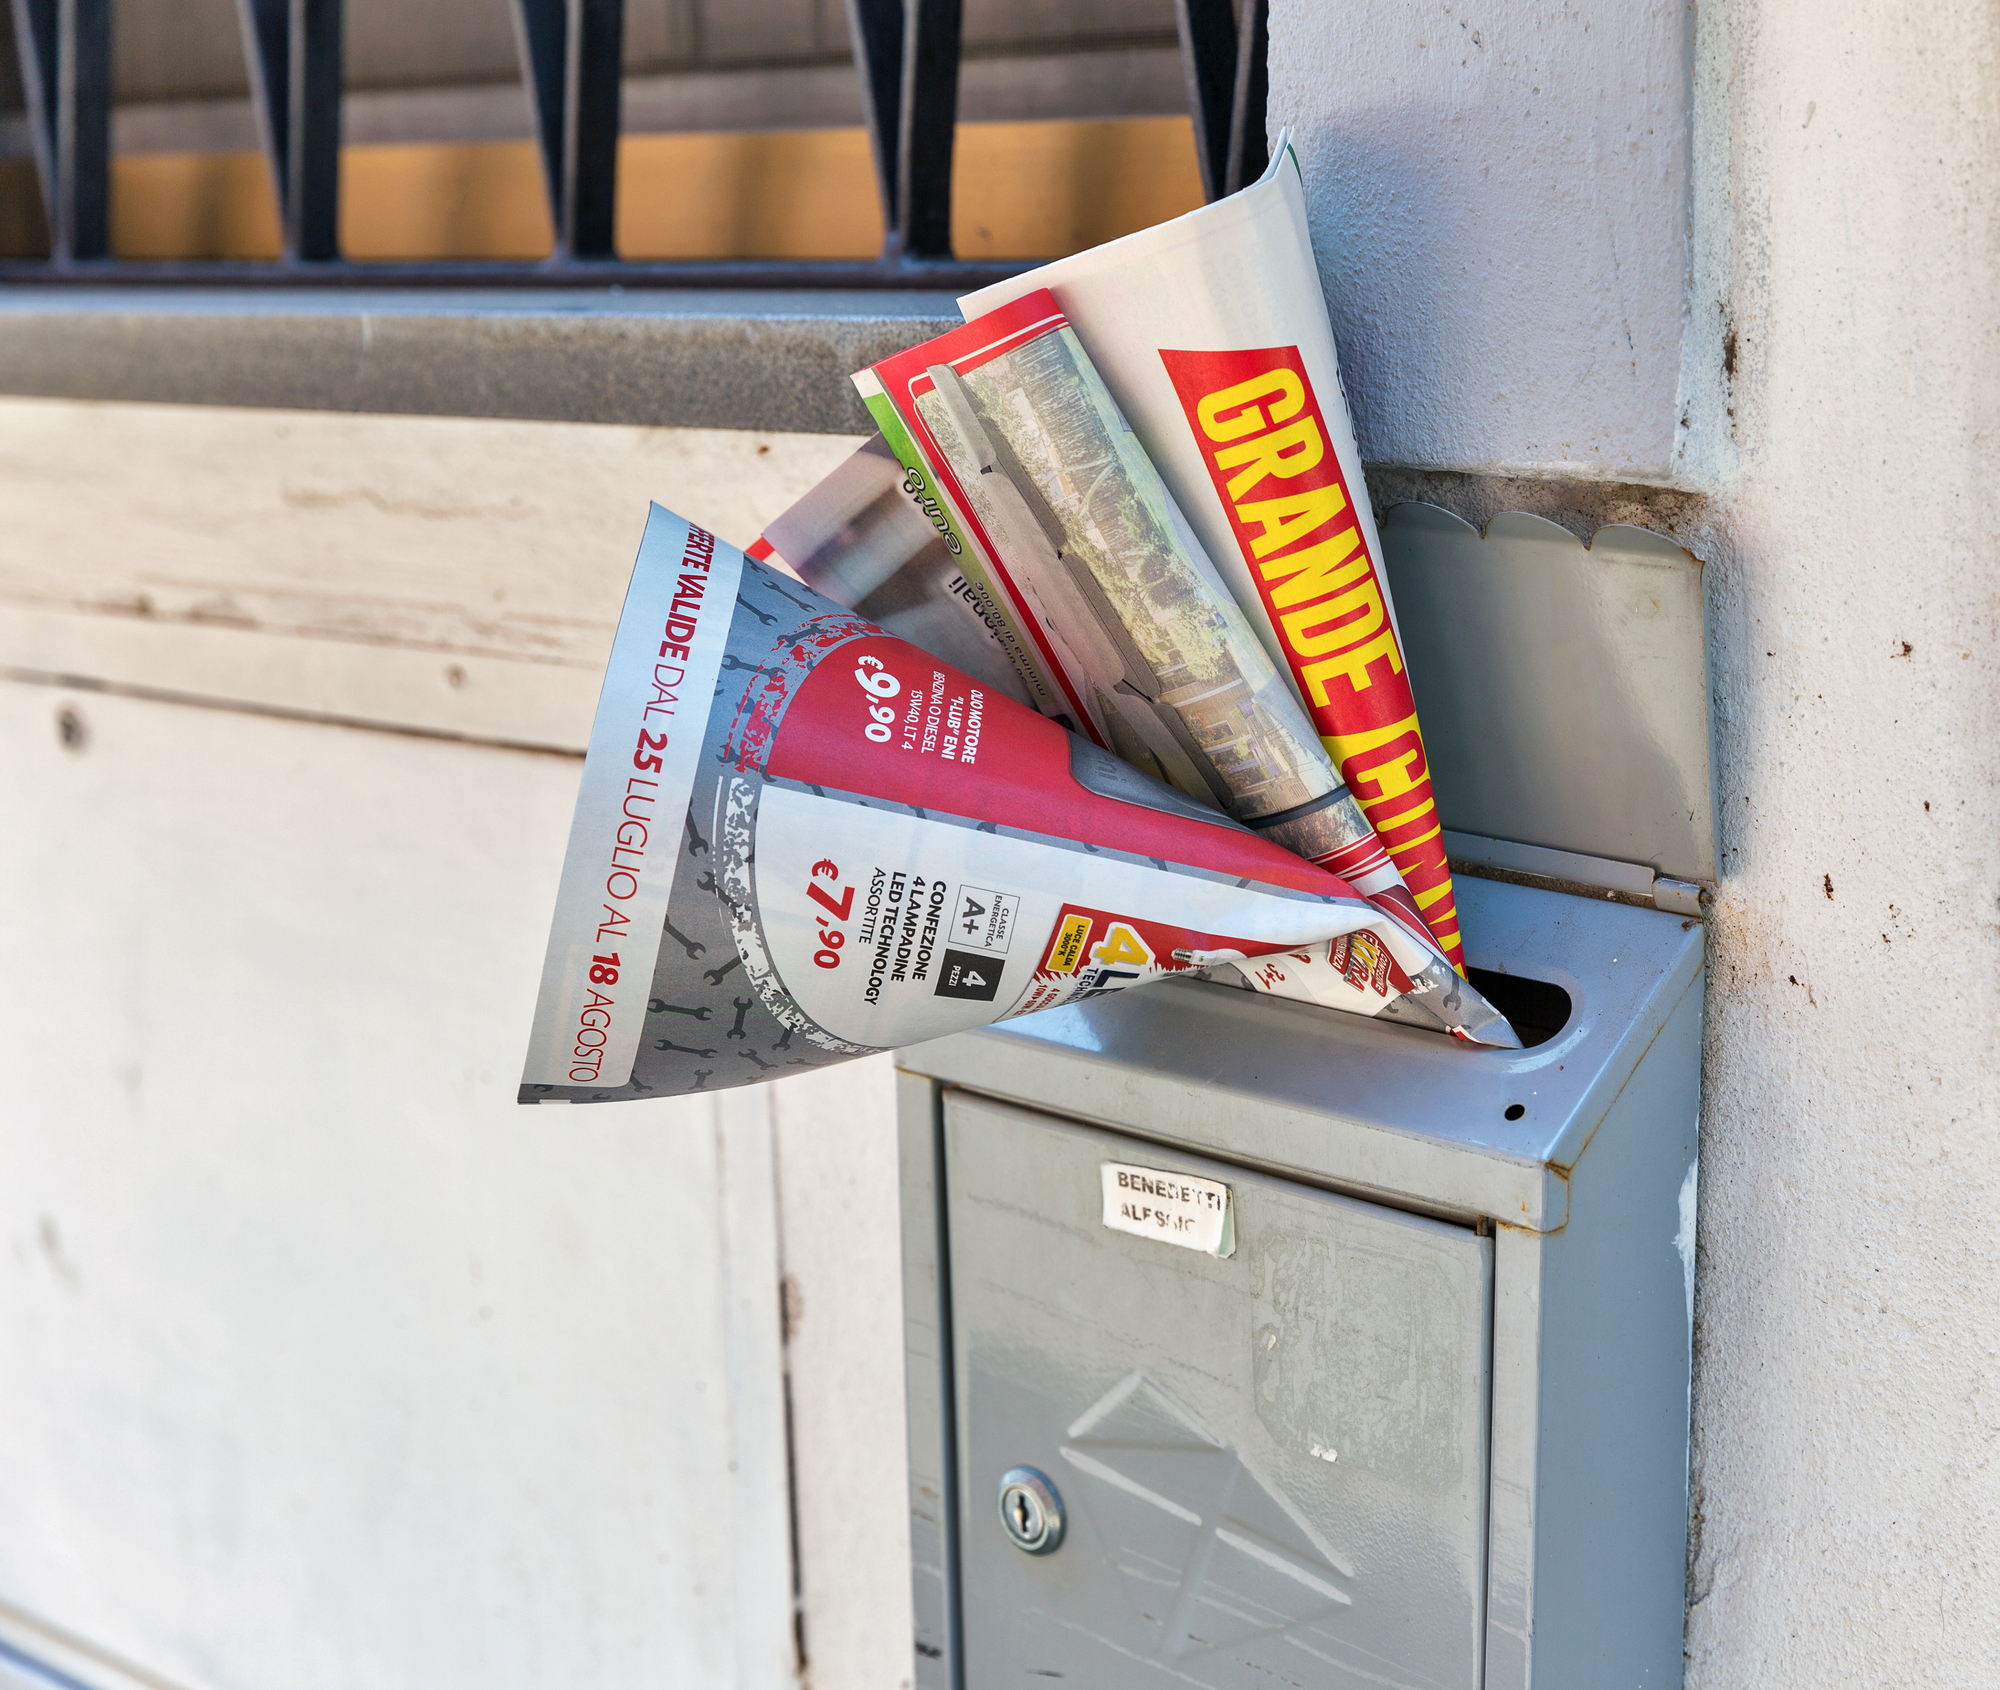 Printed advertising and promotional newspapers in the mailbox.